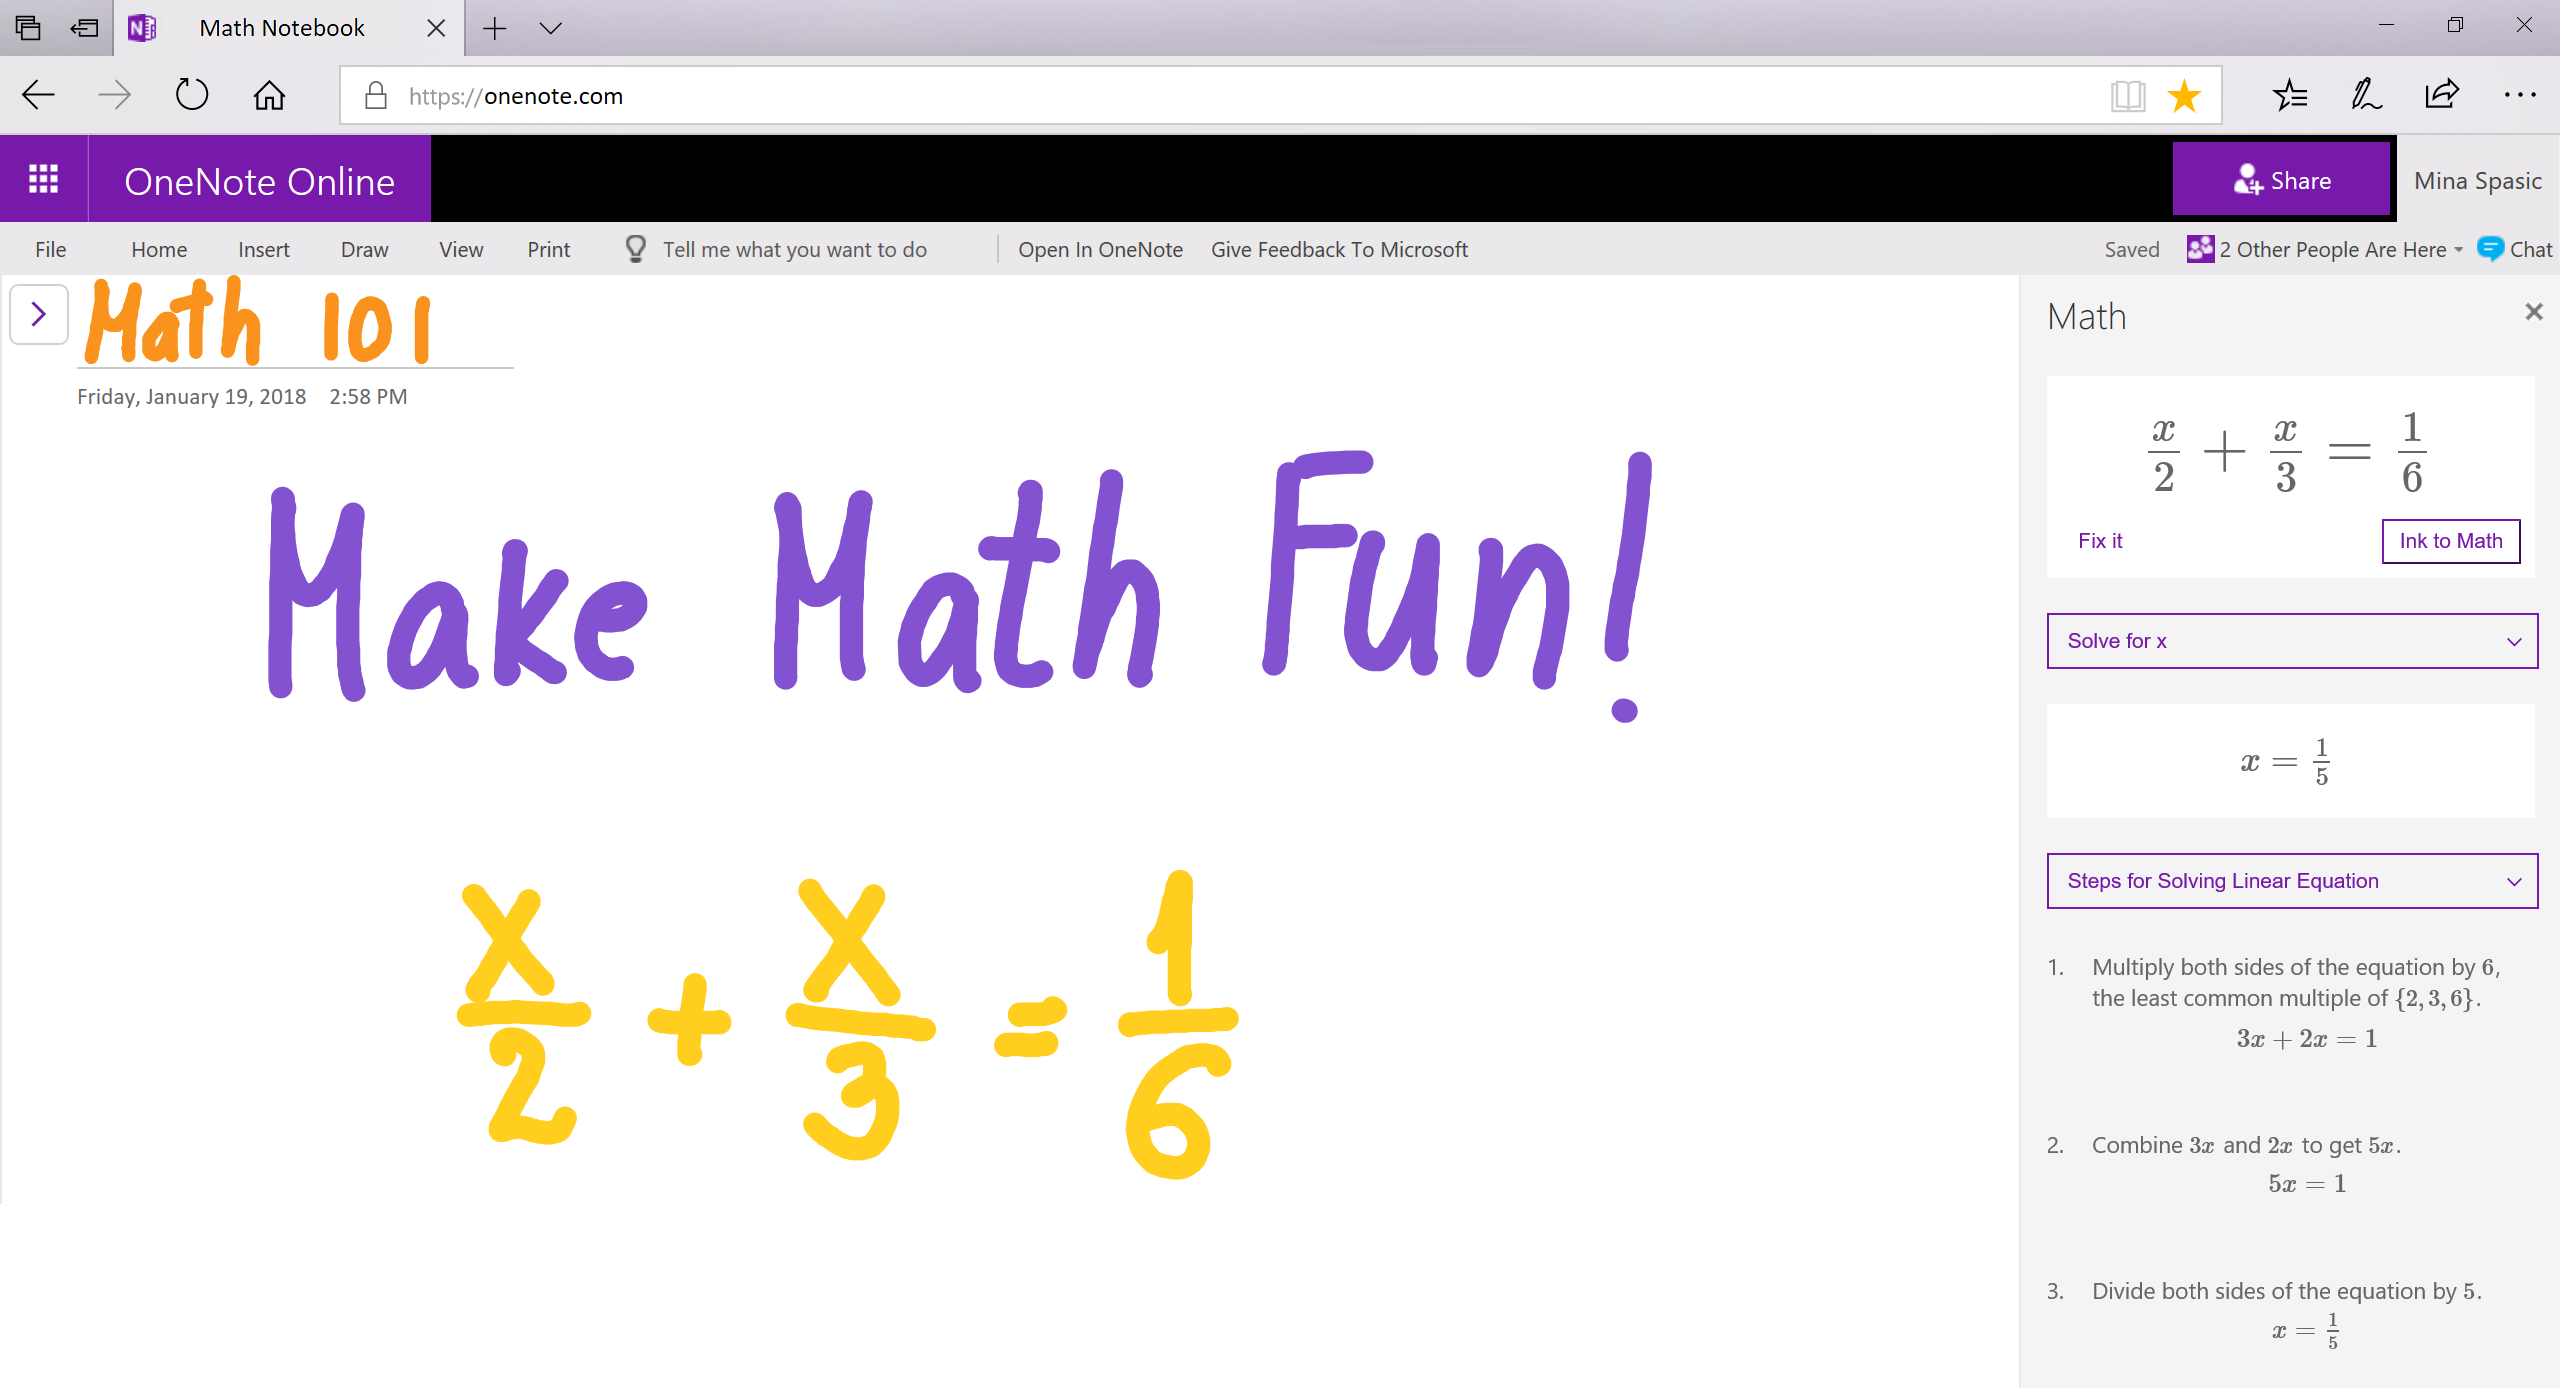 Ink math assistant for OneNote Online is here! - Microsoft Community Hub